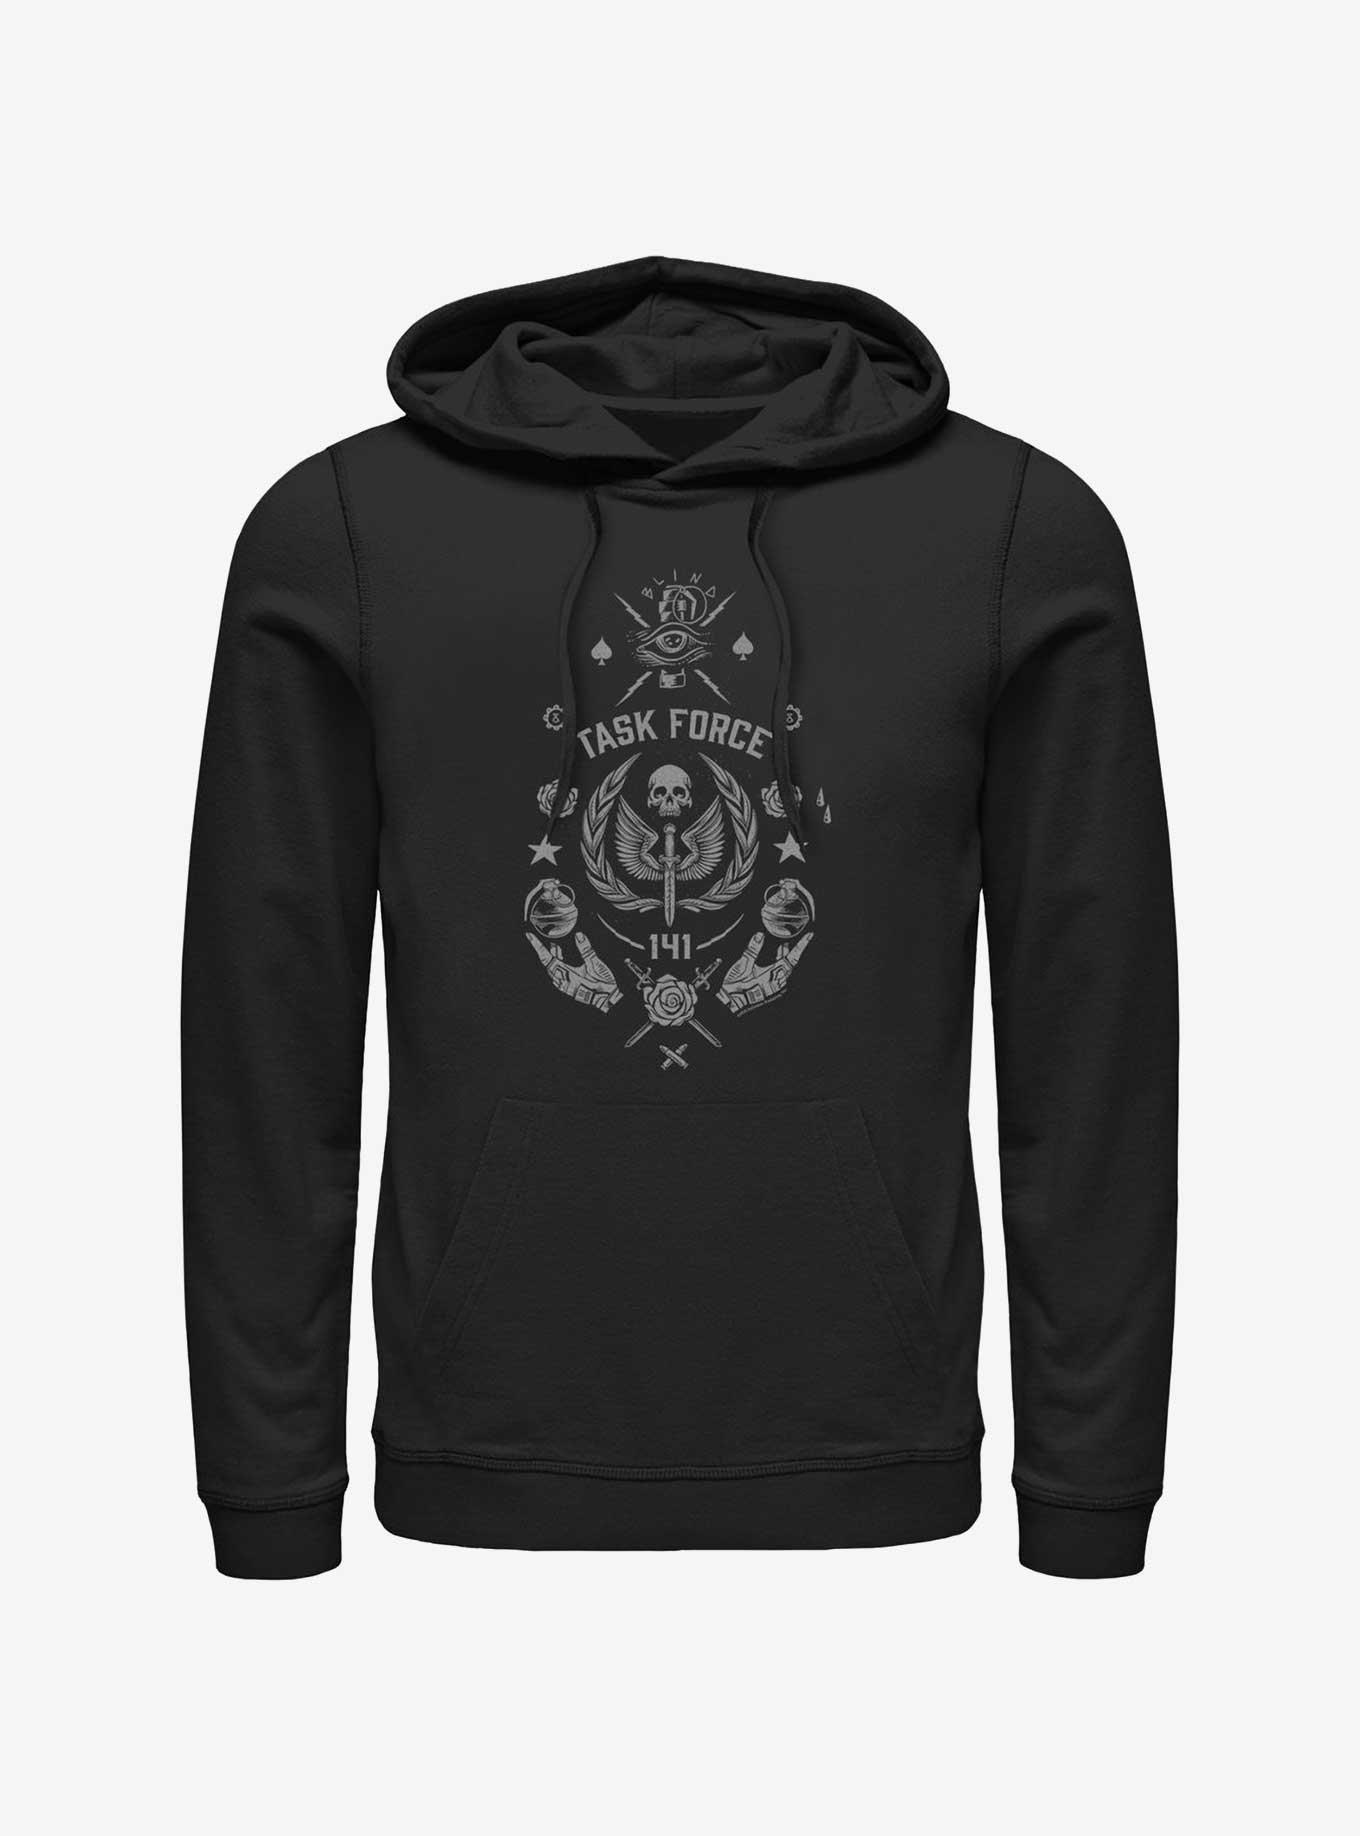 Call of Duty Task Force 141 Icon Hoodie